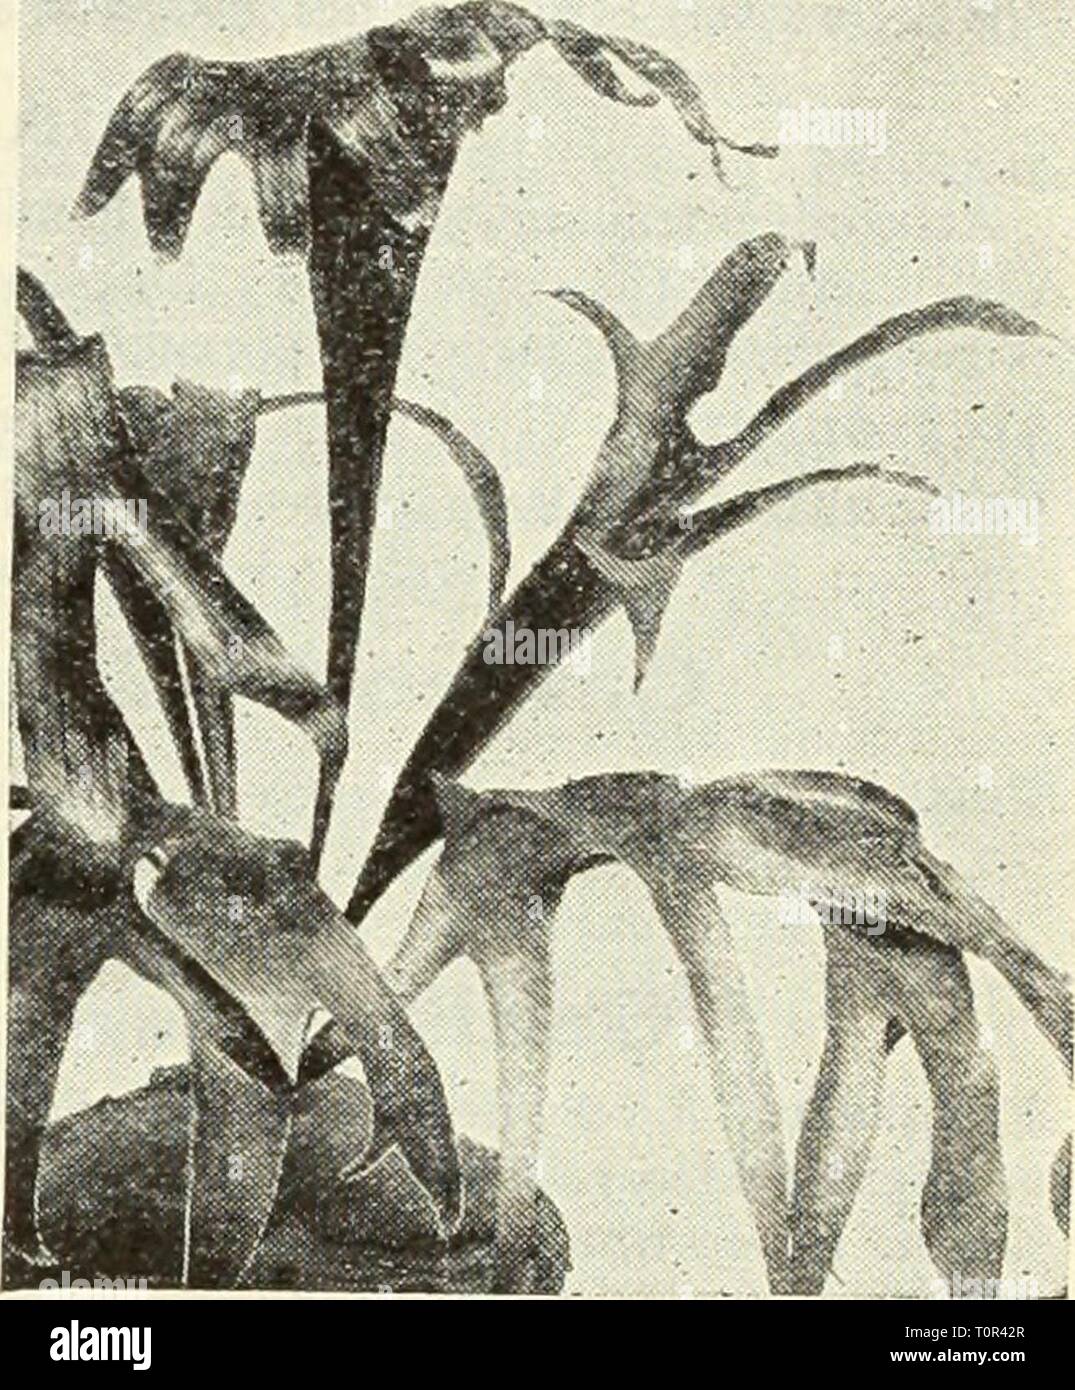 Dreer's bulbs  plants, shrubs, Dreer's bulbs : plants, shrubs, and seeds for fall planting  dreersbulbsplant1936henr Year: 1936  Davallia Ajiensis plumosa This is one of the very best house Ferns as it will stand the hot and dry atmosphere of most living rooms. It is a truly beautiful Fern of strong growth with attractive rich dark green fronds of heavy substance. Fine in pots but also widely grown in hanging baskets or as Fern balls. Its rhizomes often spread over the soil surface which adds to the inter- esting features of this plant. 3-inch pots 75c; 4-inch pots $1.00, each. Nephrolepis bos Stock Photo